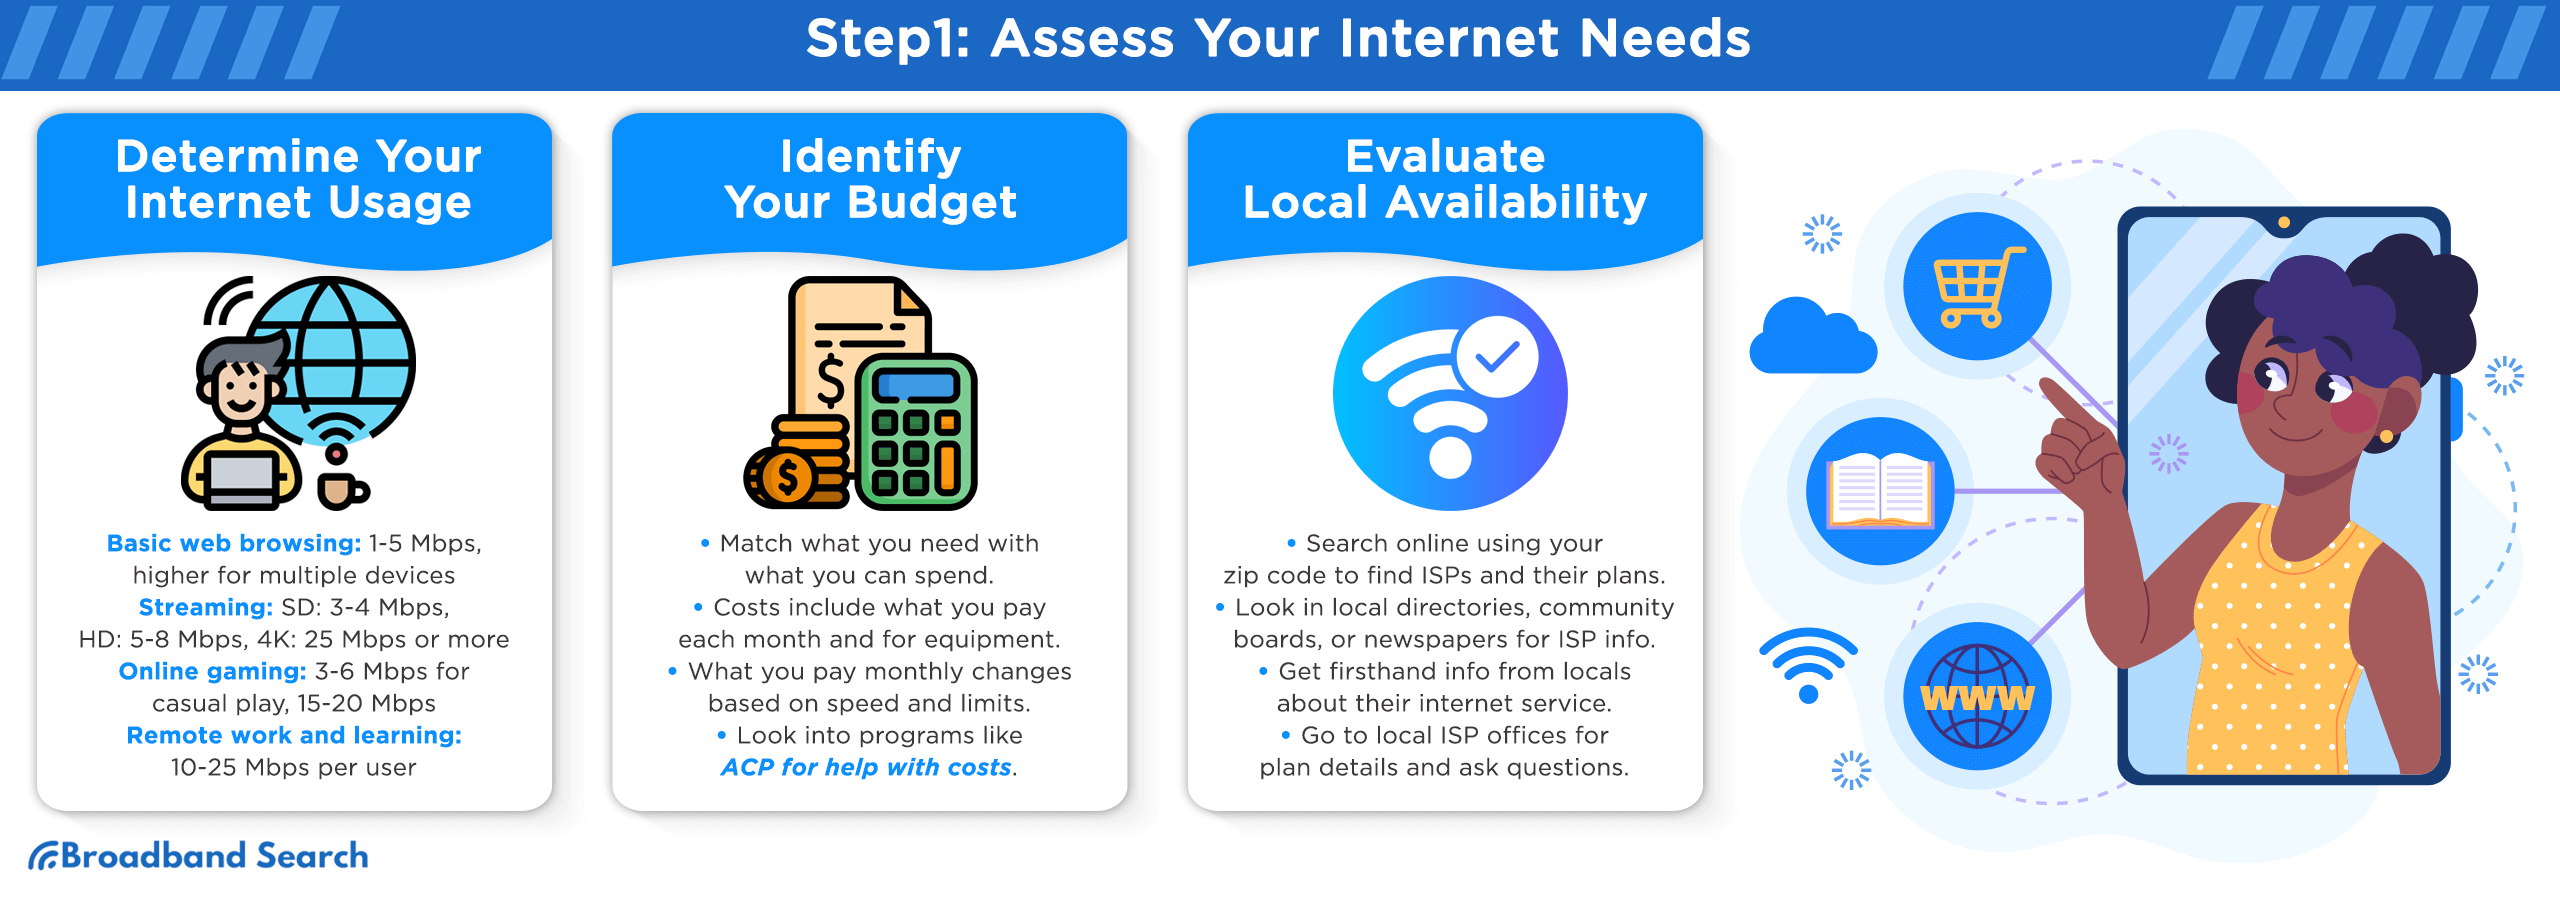 Tips on how to asses your internet needs